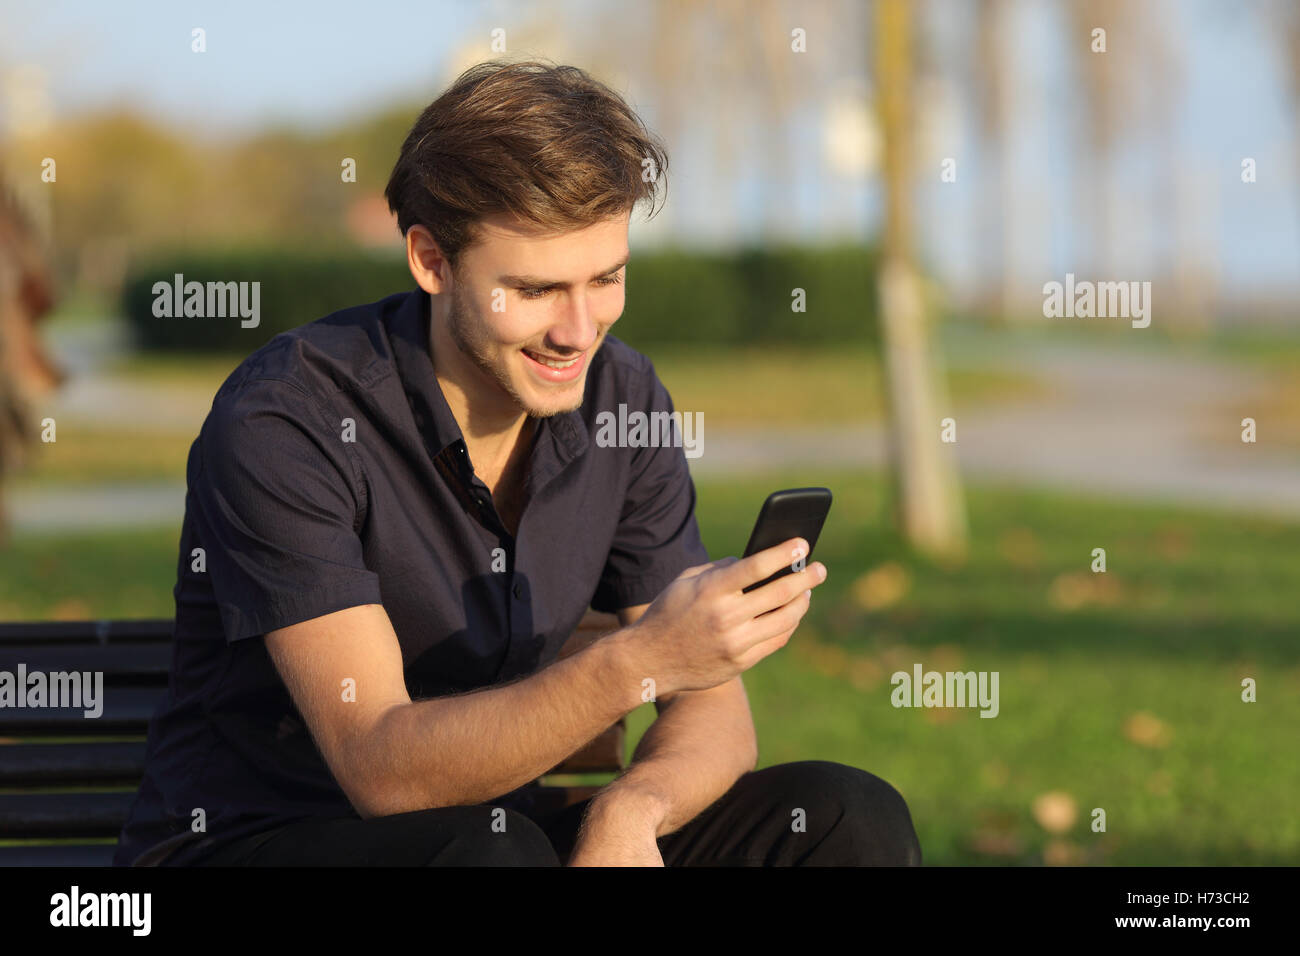 Man using a smartphone sitting on a bench in a park Stock Photo